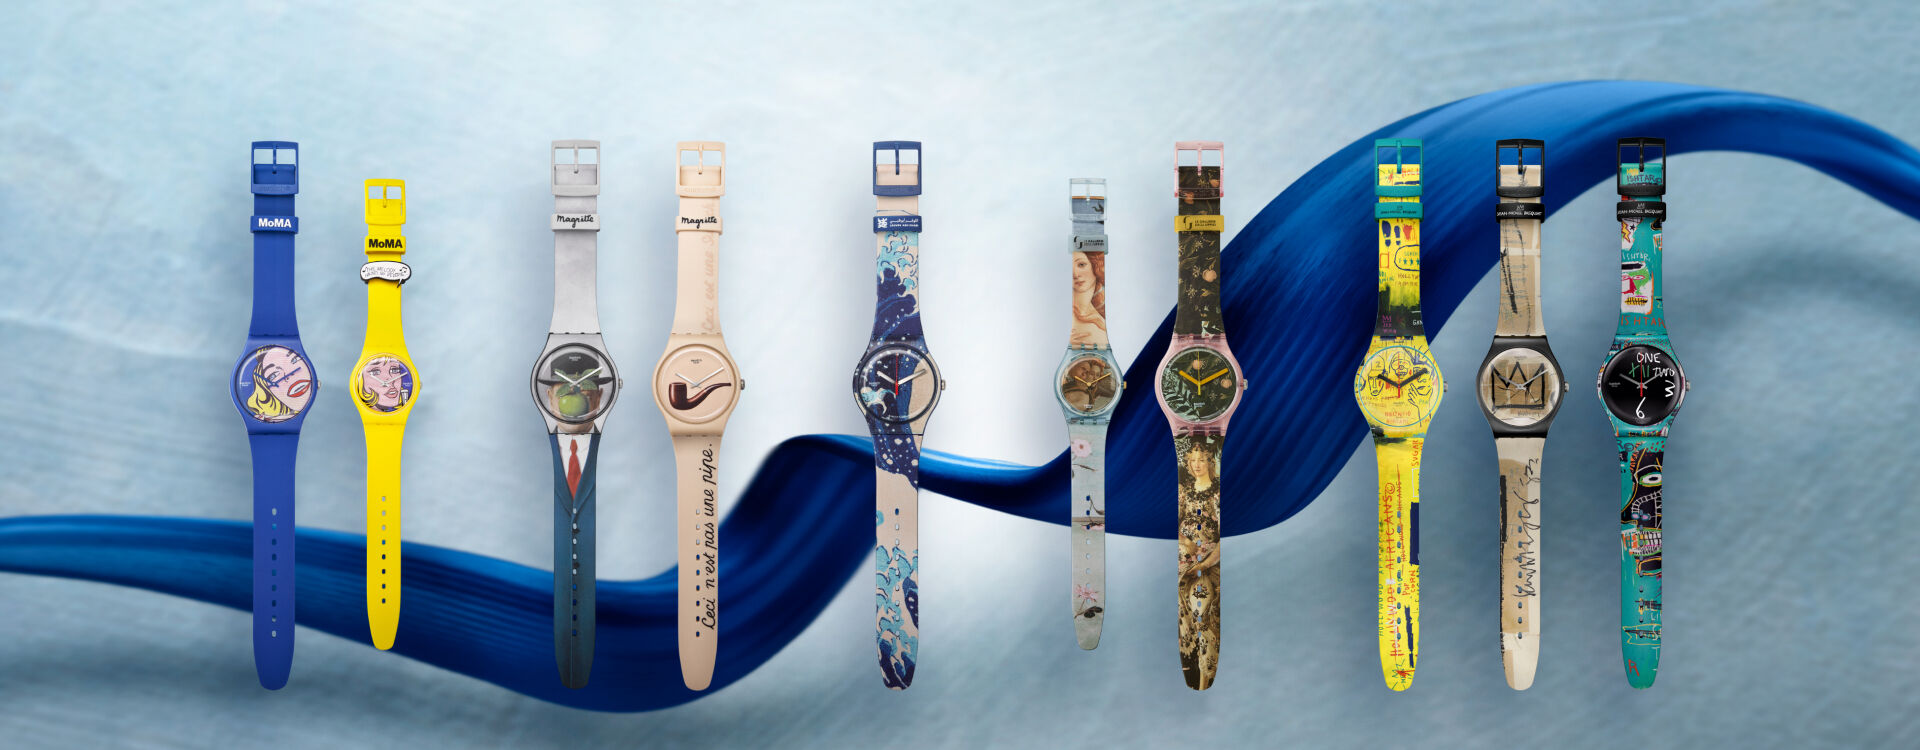 swatch art journey collection